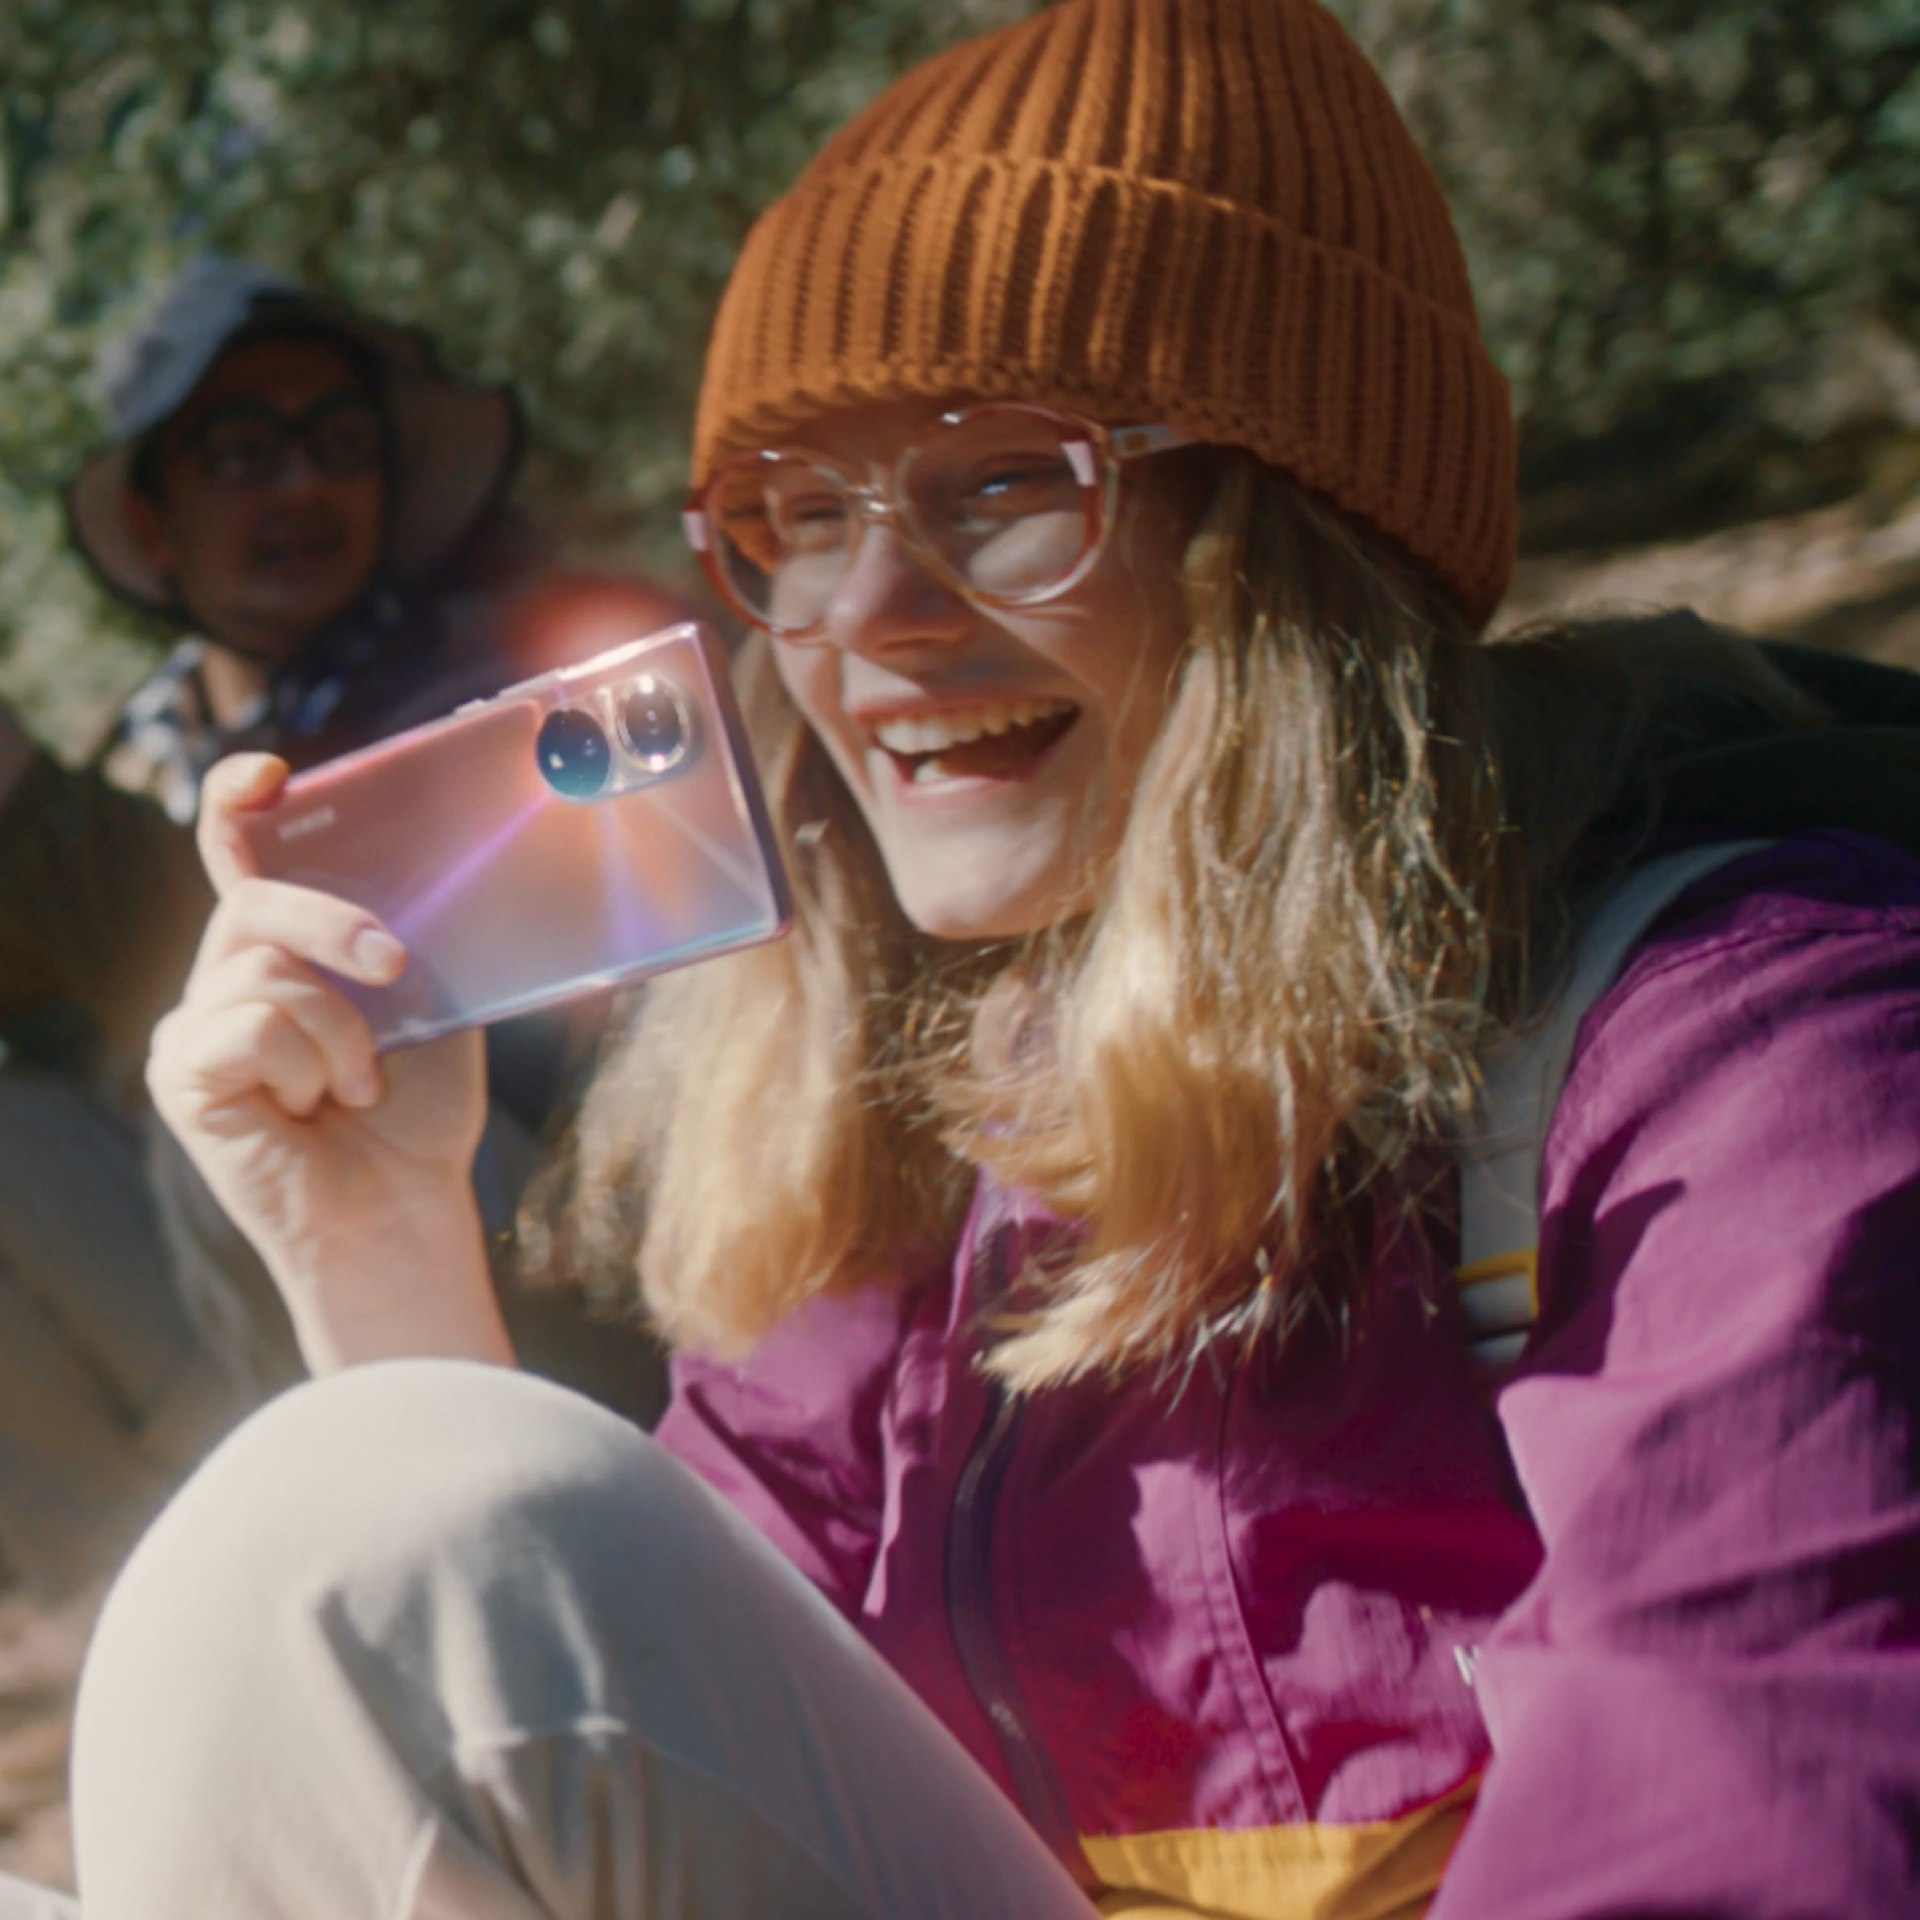 Image of a smiling woman in hiking gear taking a photo with an Honor 50 smartphone. In the background, an out-of-focus male person with a hiking stick.